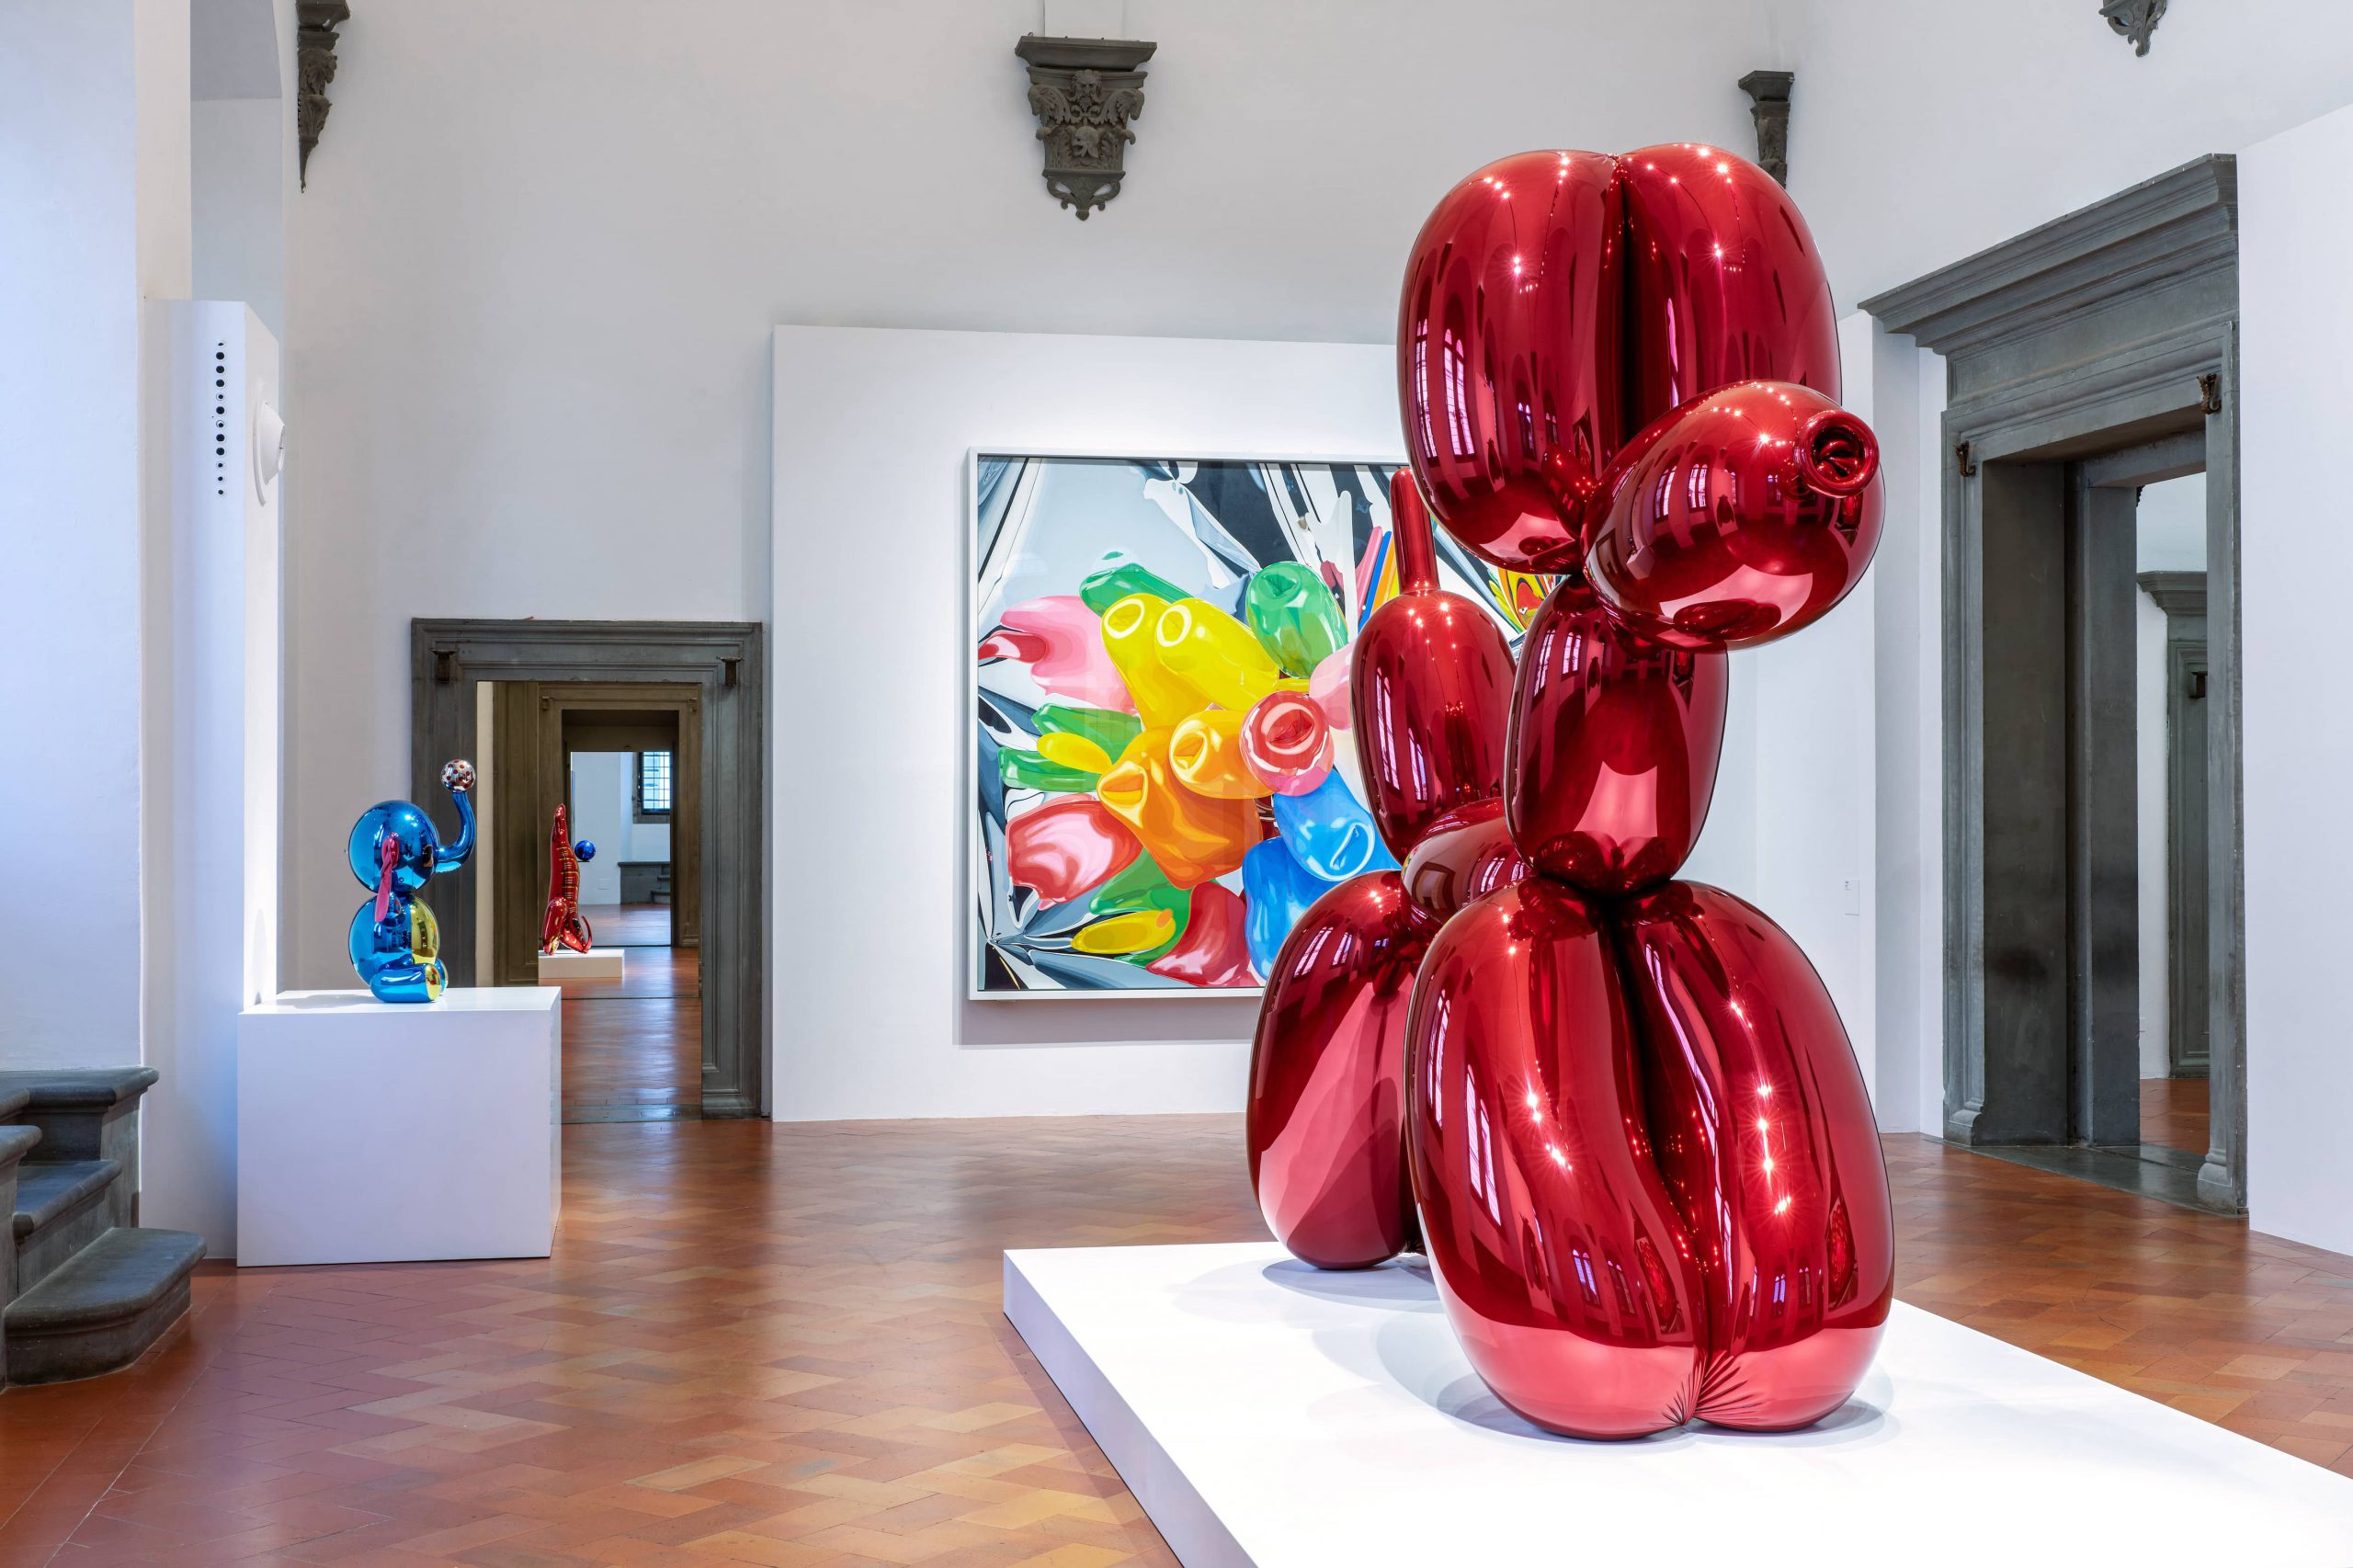 Why Not to Work for Jeff Koons